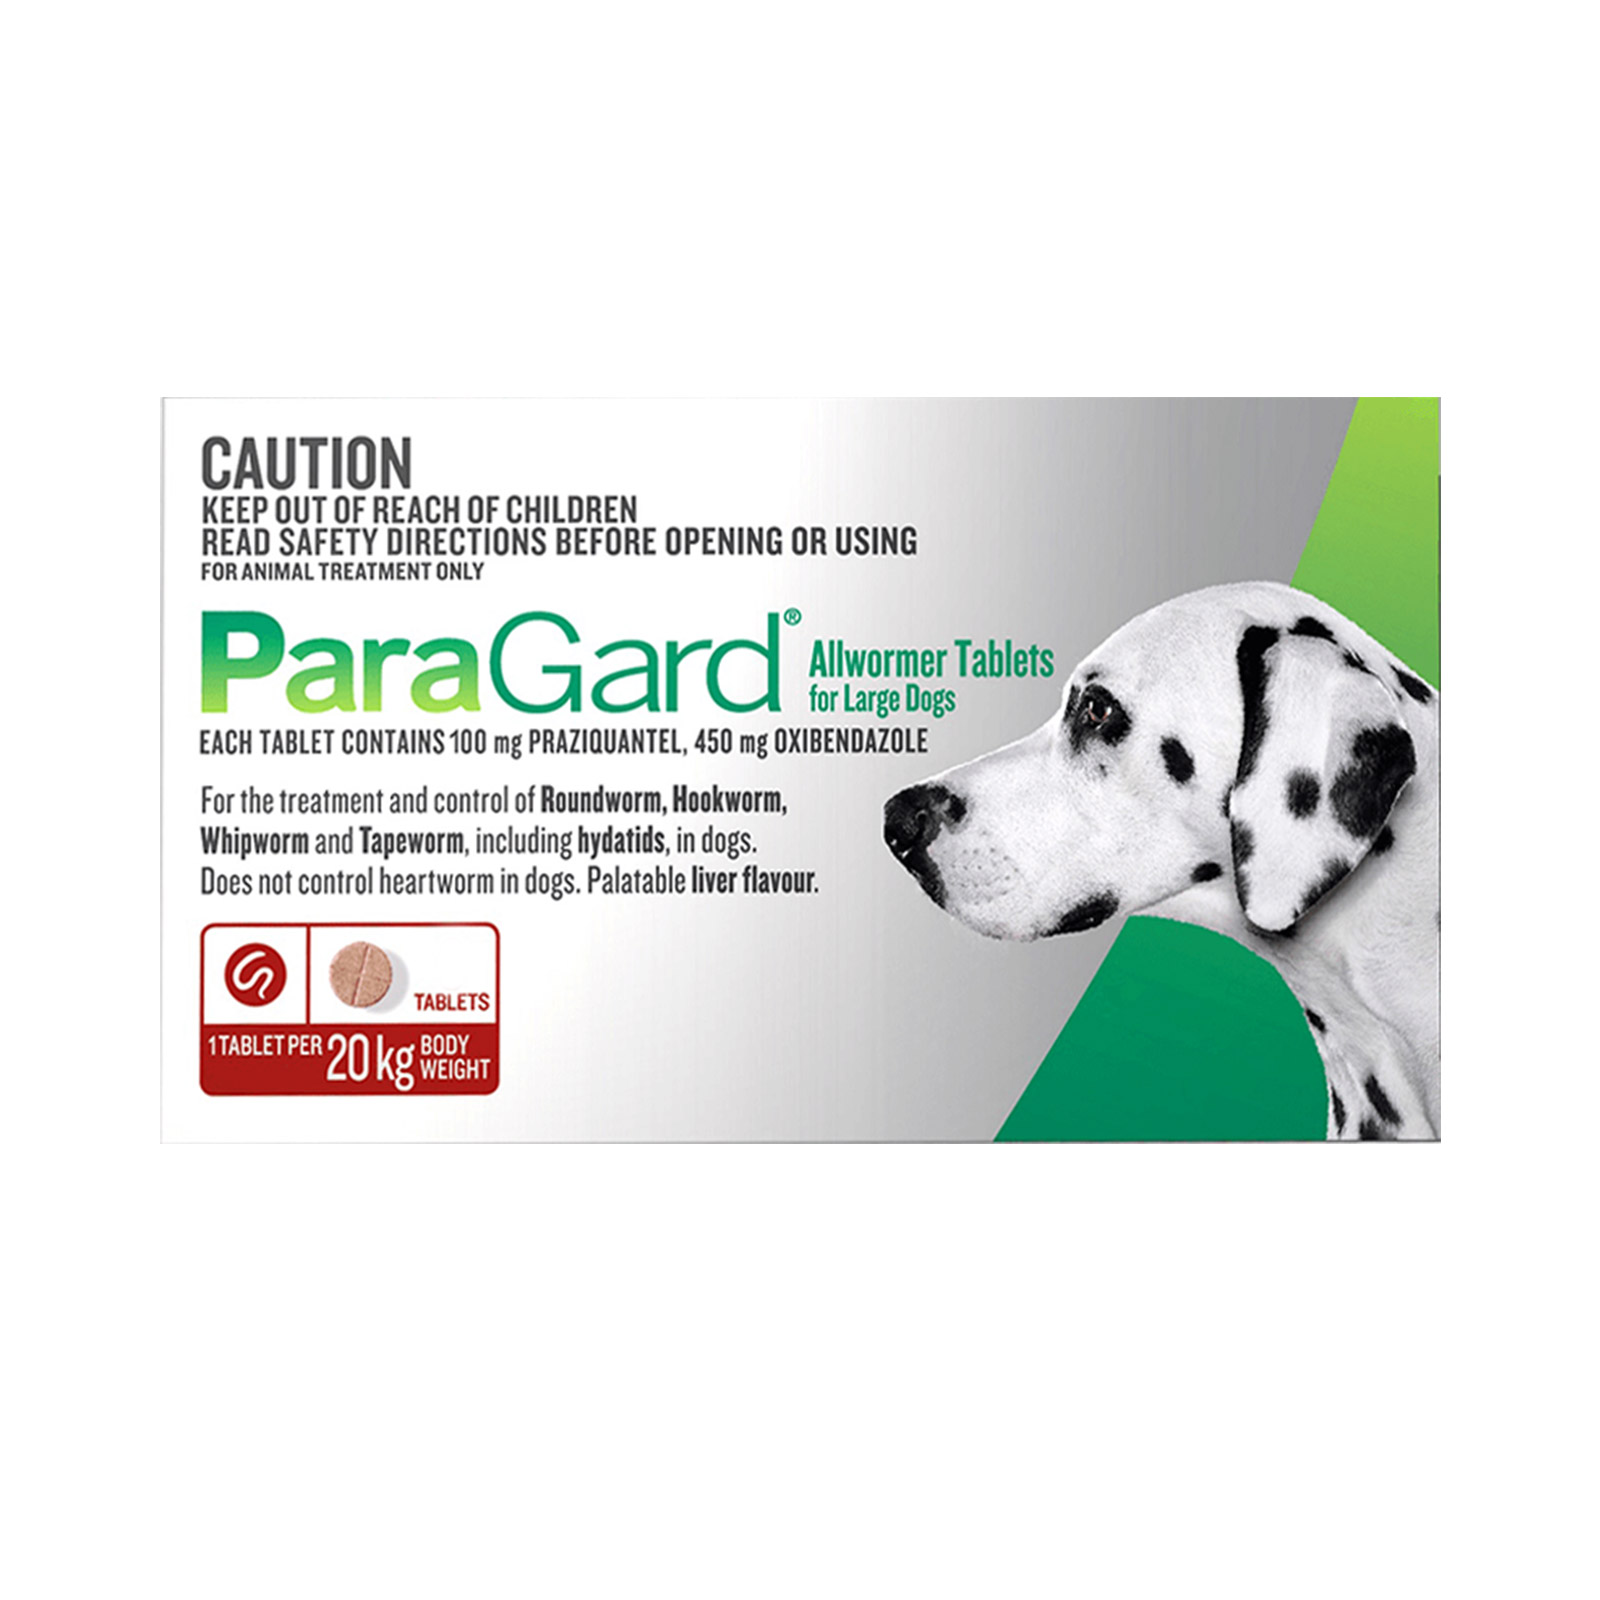 "Paragard Allwormer For Large Dogs 44 Lbs (20 Kg )red 3 Tablets"